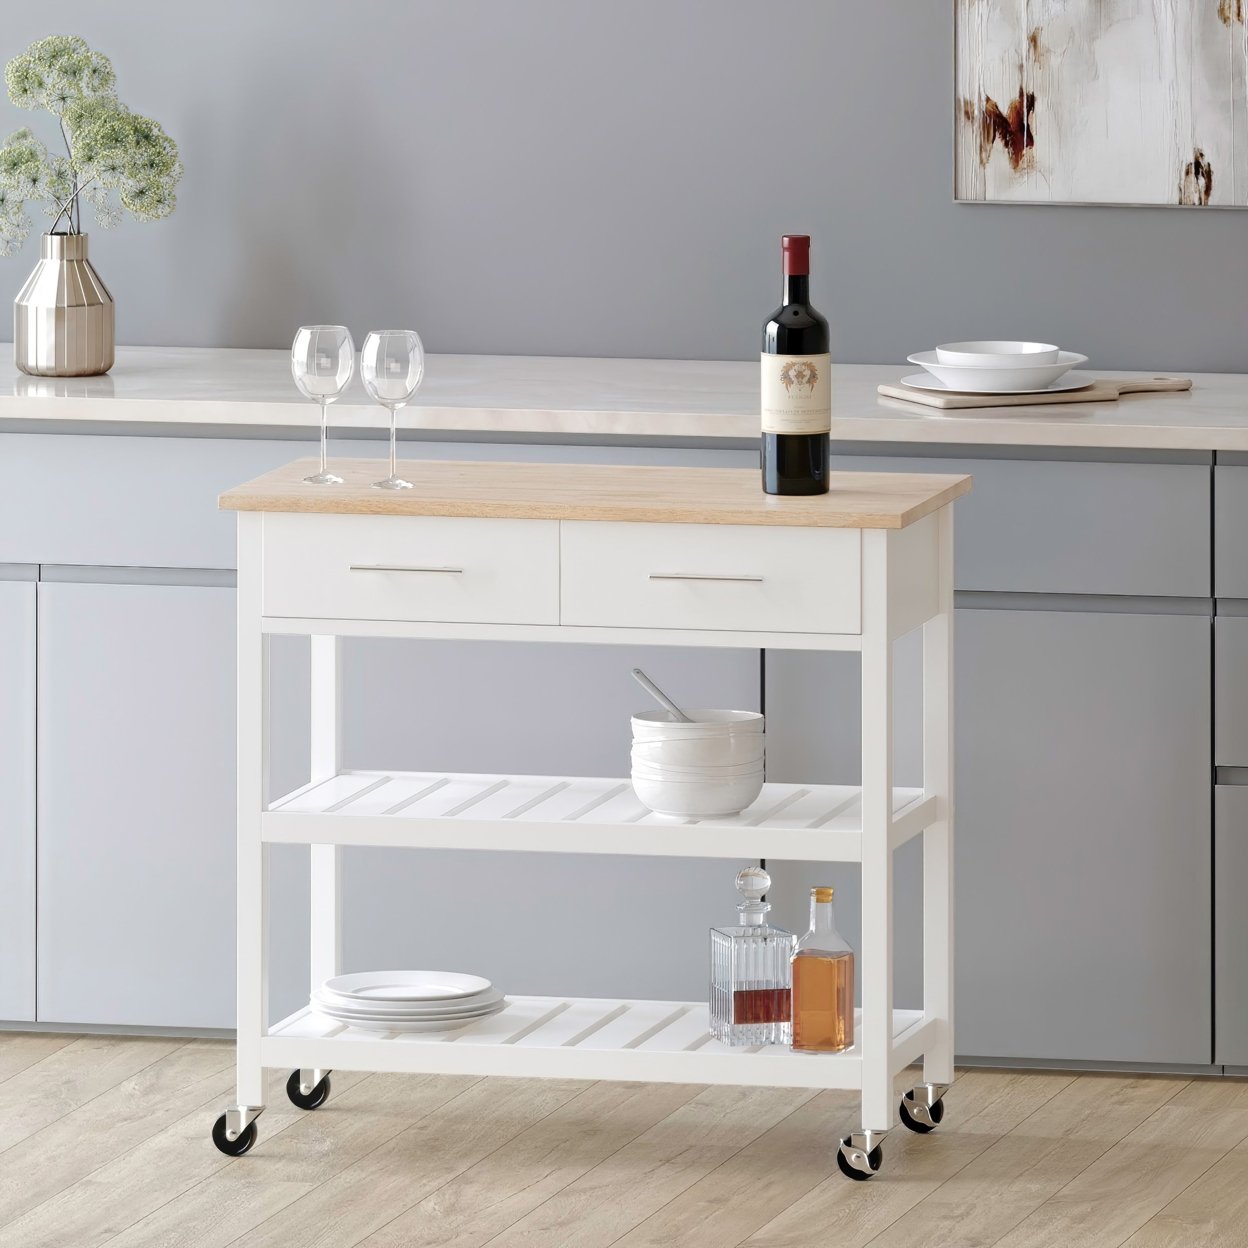 Enon Contemporary Kitchen Cart With Wheels - Black/natural